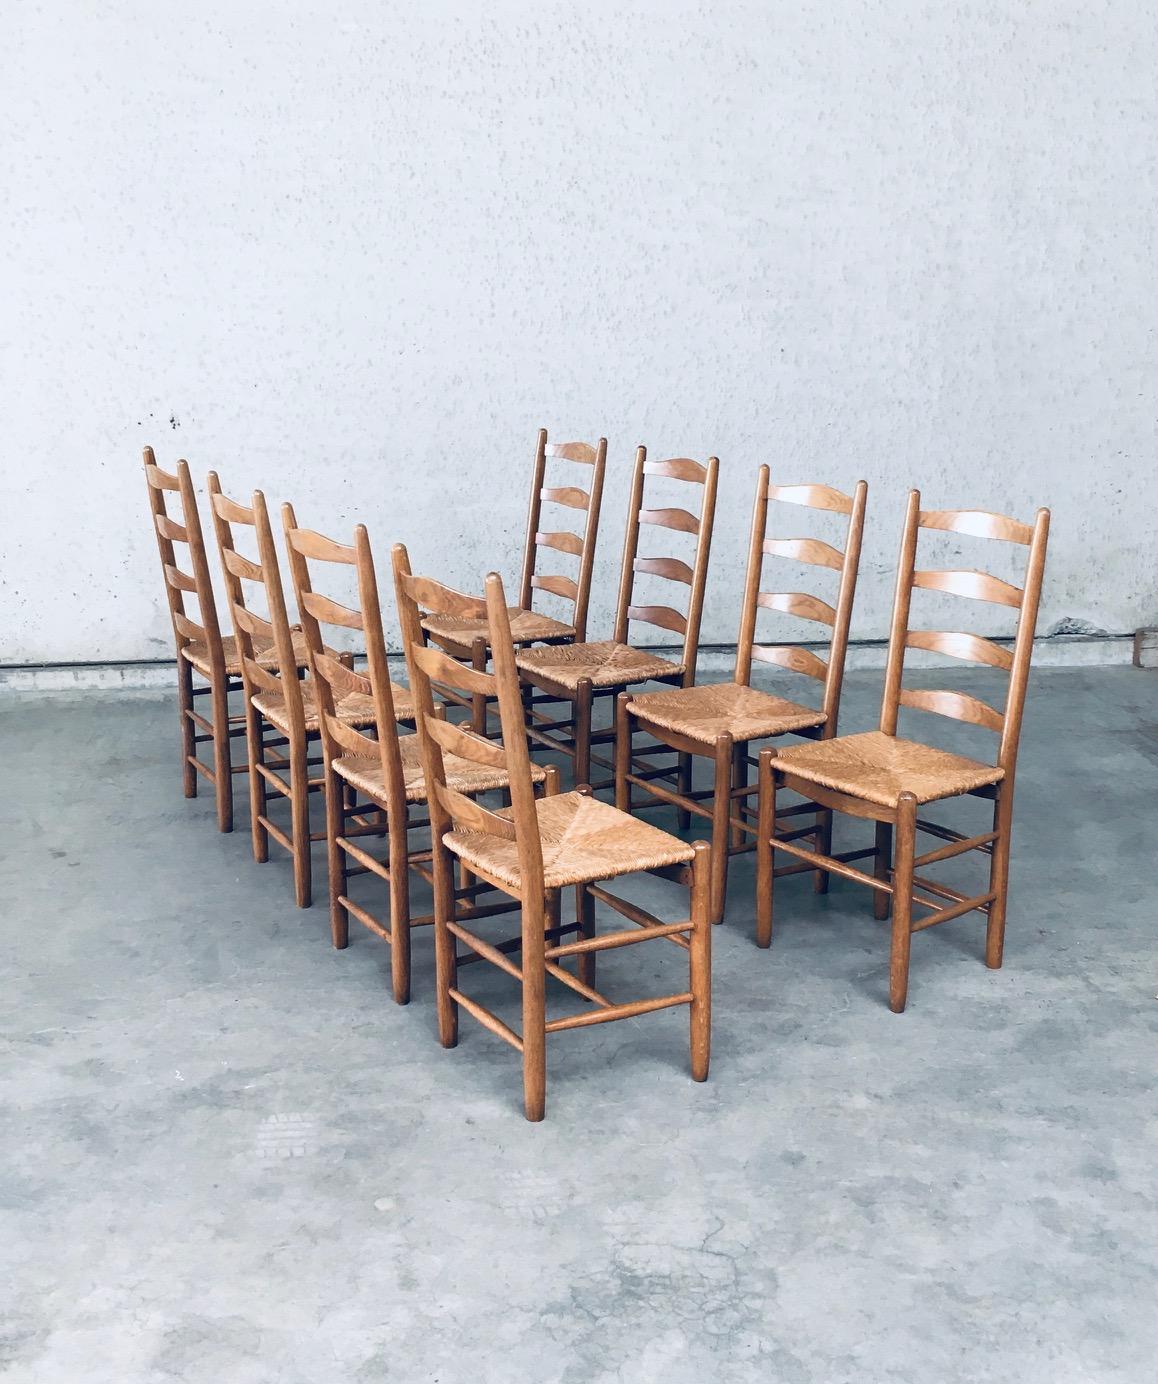 Mid-20th Century Rustic Handcrafted Oak & Rush Dining Chair Set of 8, Belgium 1950's